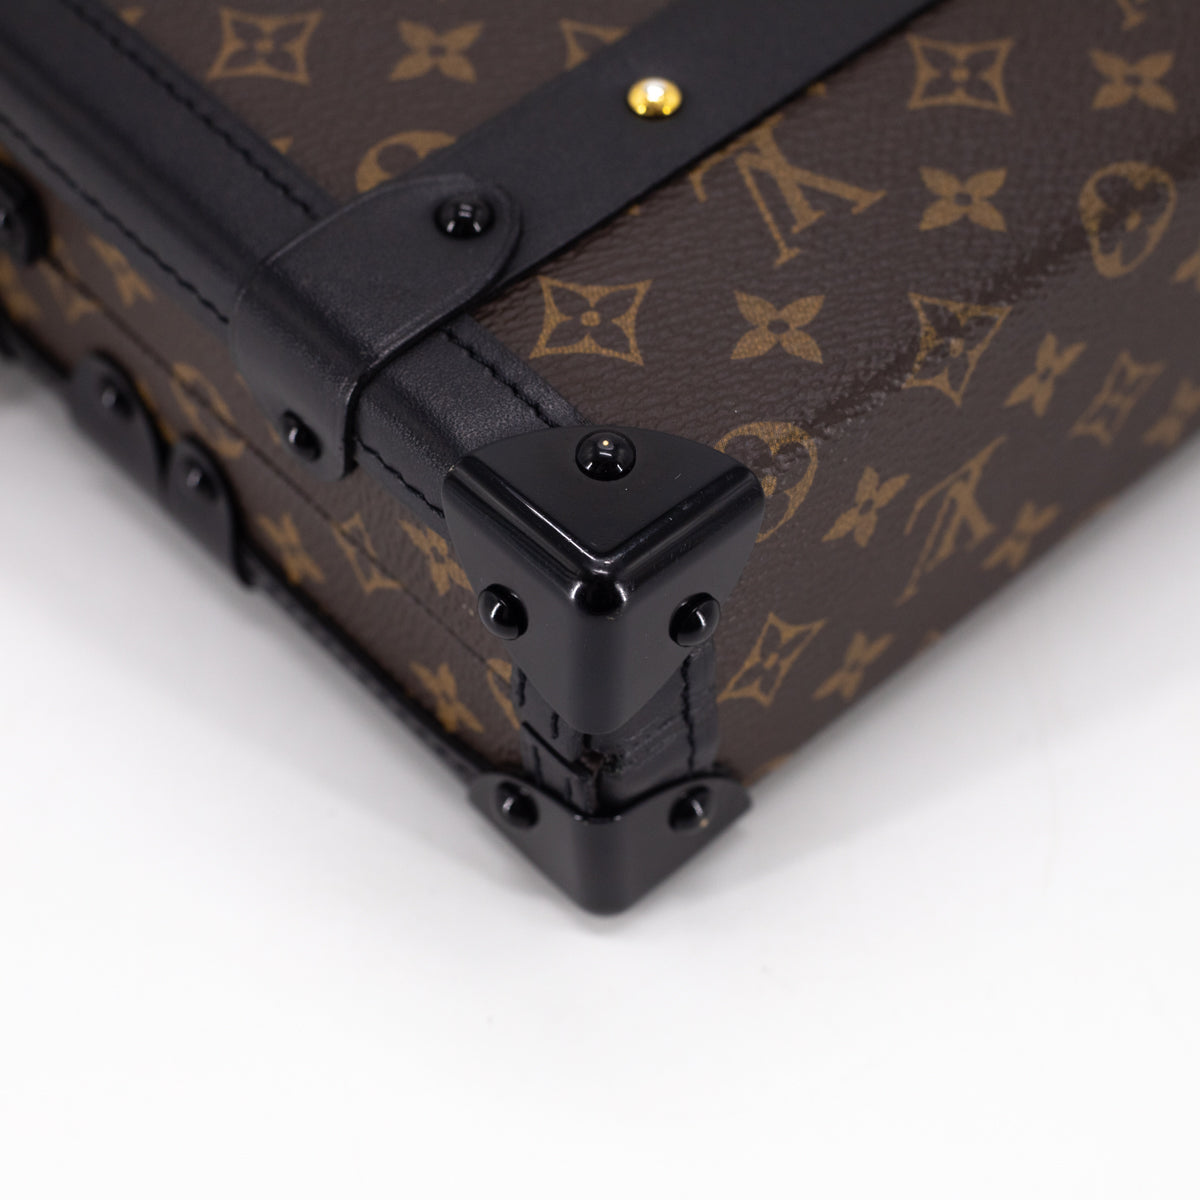 Buy Cheap Louis Vuitton AAA+ Petite Malle Monogram bags #99922438 from